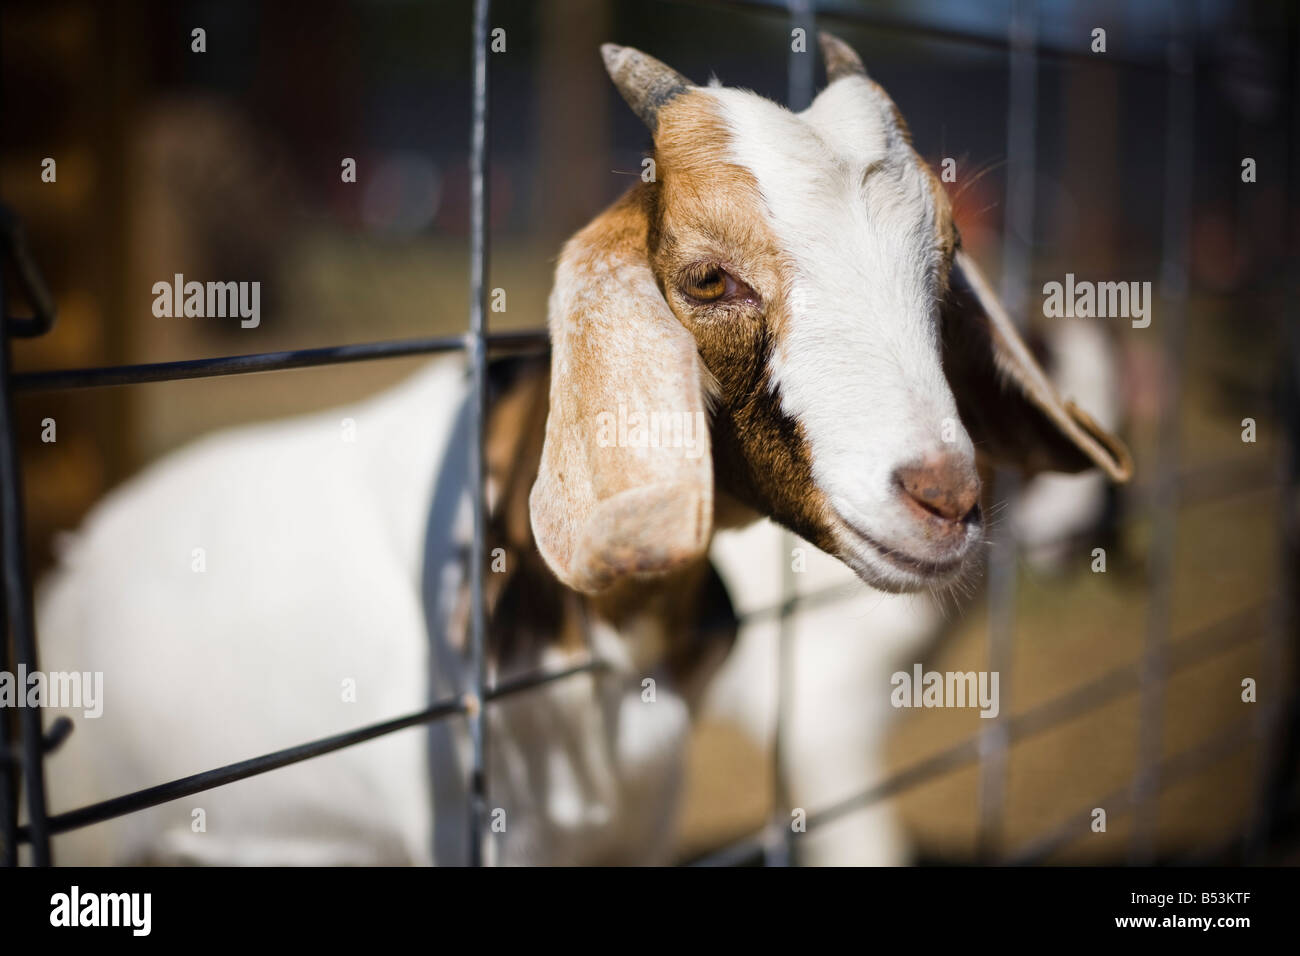 Billy goat sticking his head out of the wire fence at a petting zoo in Arkansas. Stock Photo